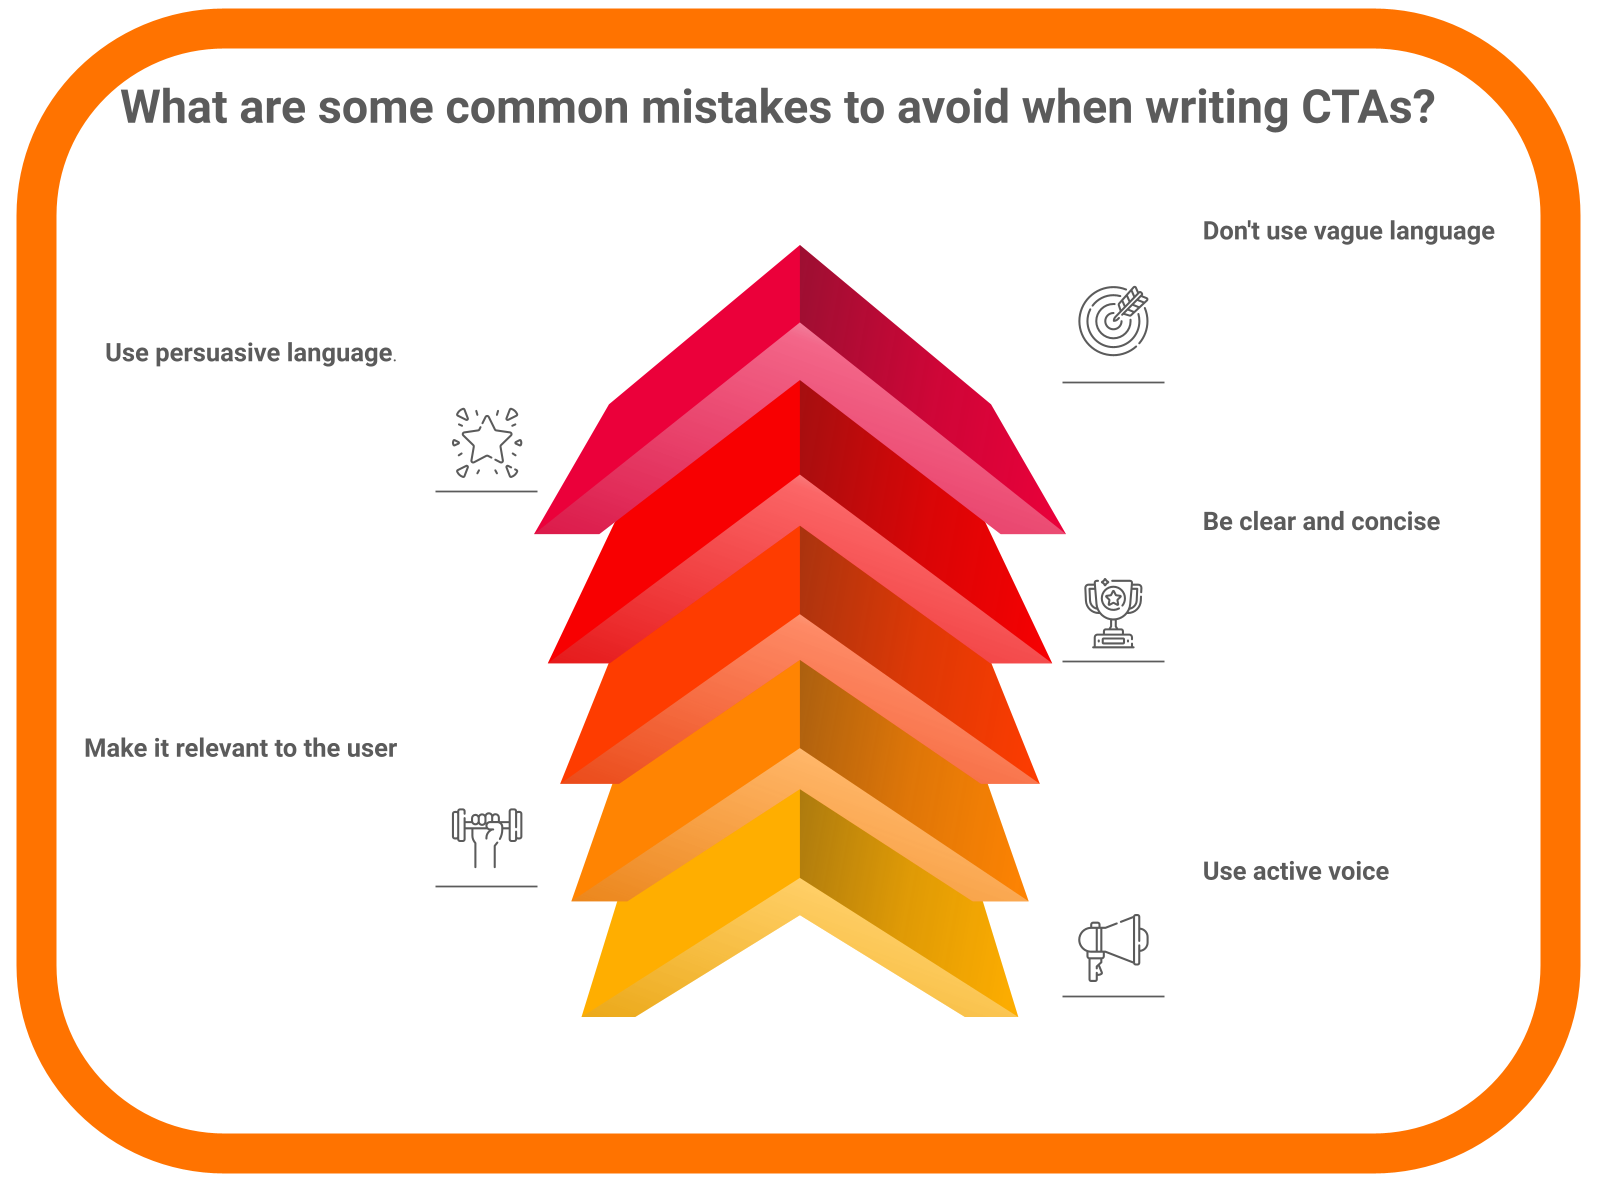 What are some common mistakes to avoid when writing CTAs to optimize CTA phrases?